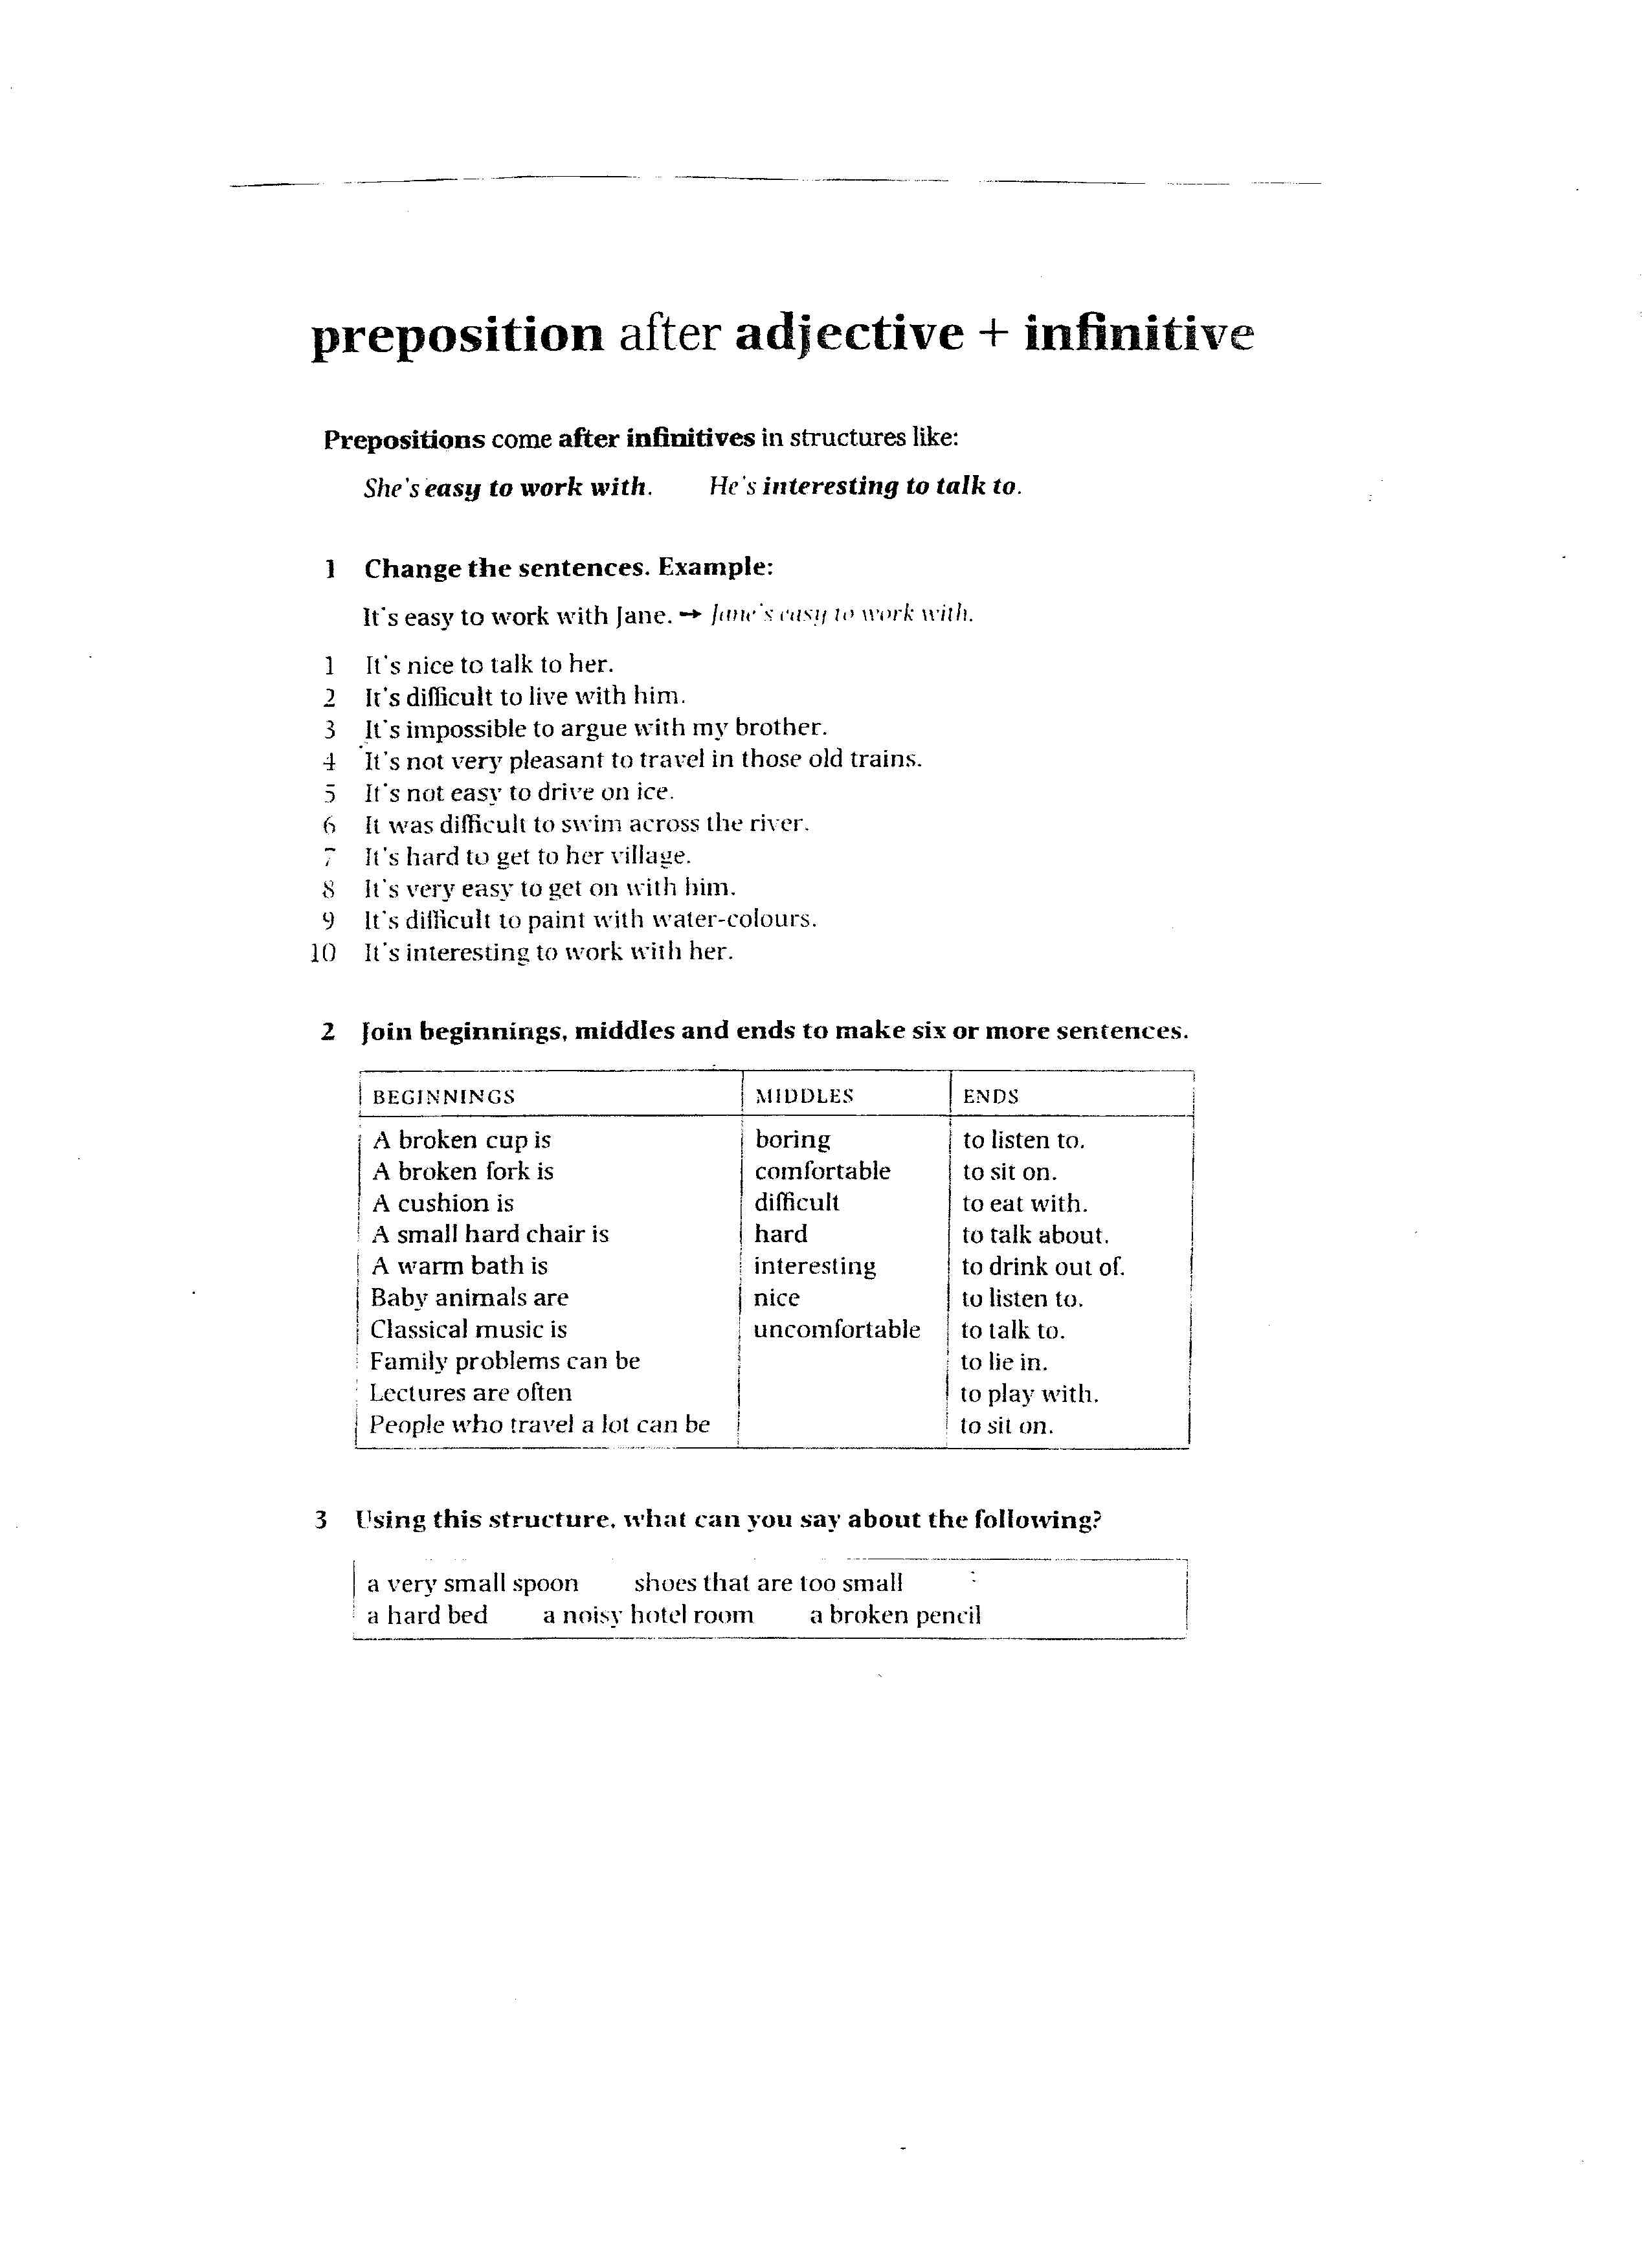 preposition after